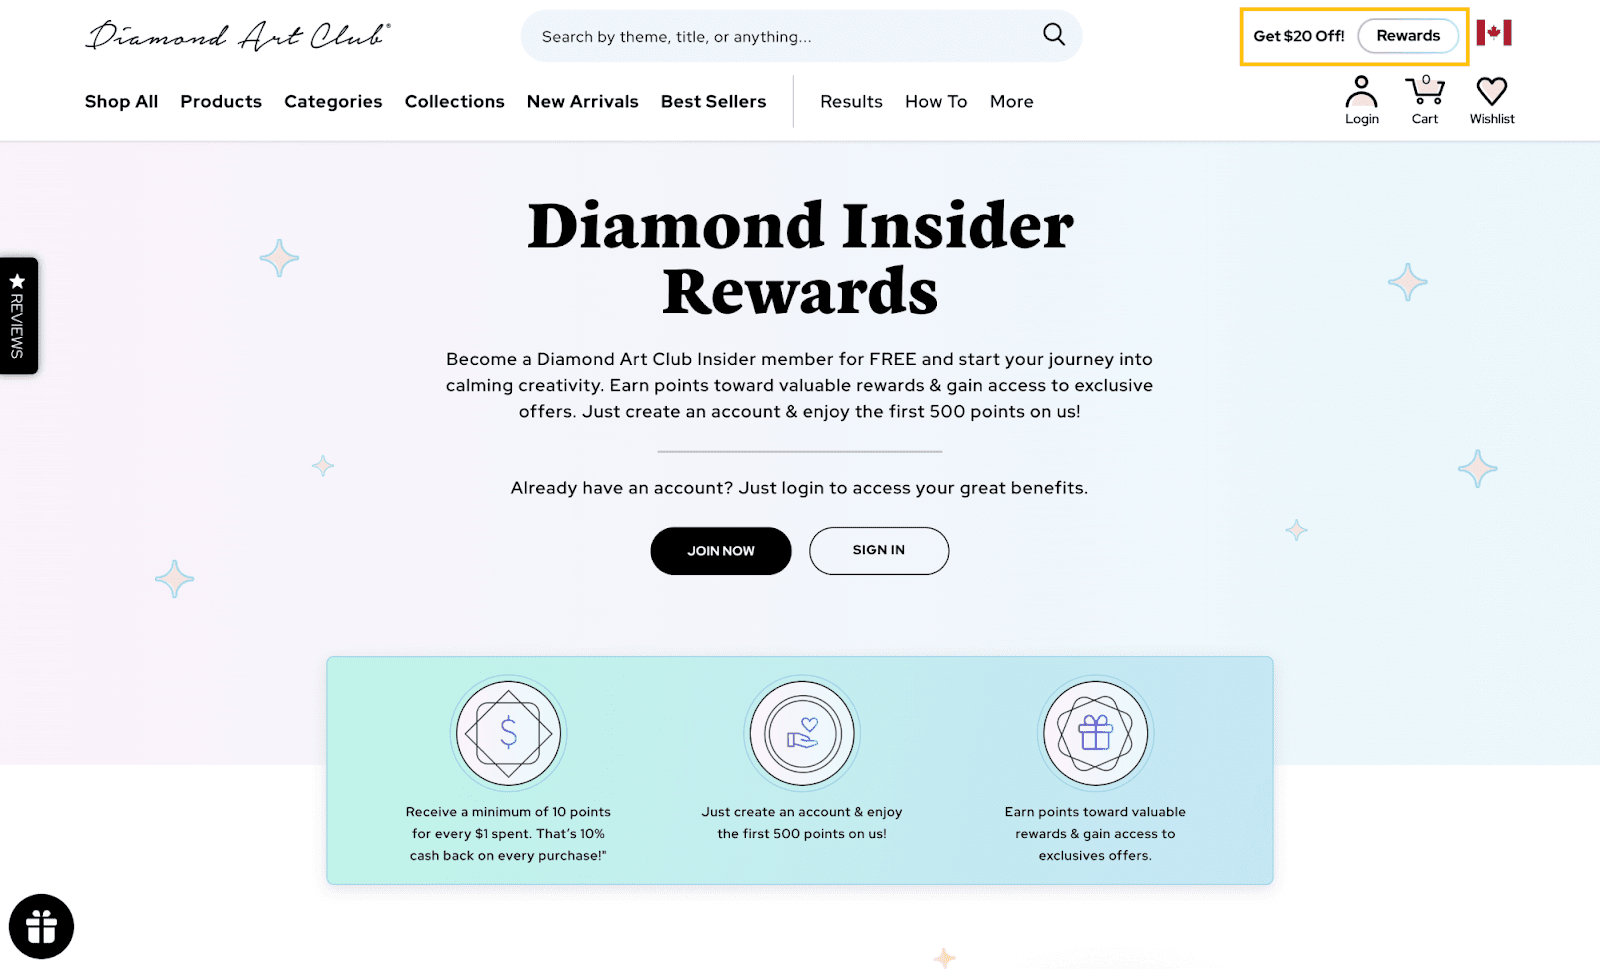 How Loyalty Drove Over 8 Figures in Sales for Diamond Art Club